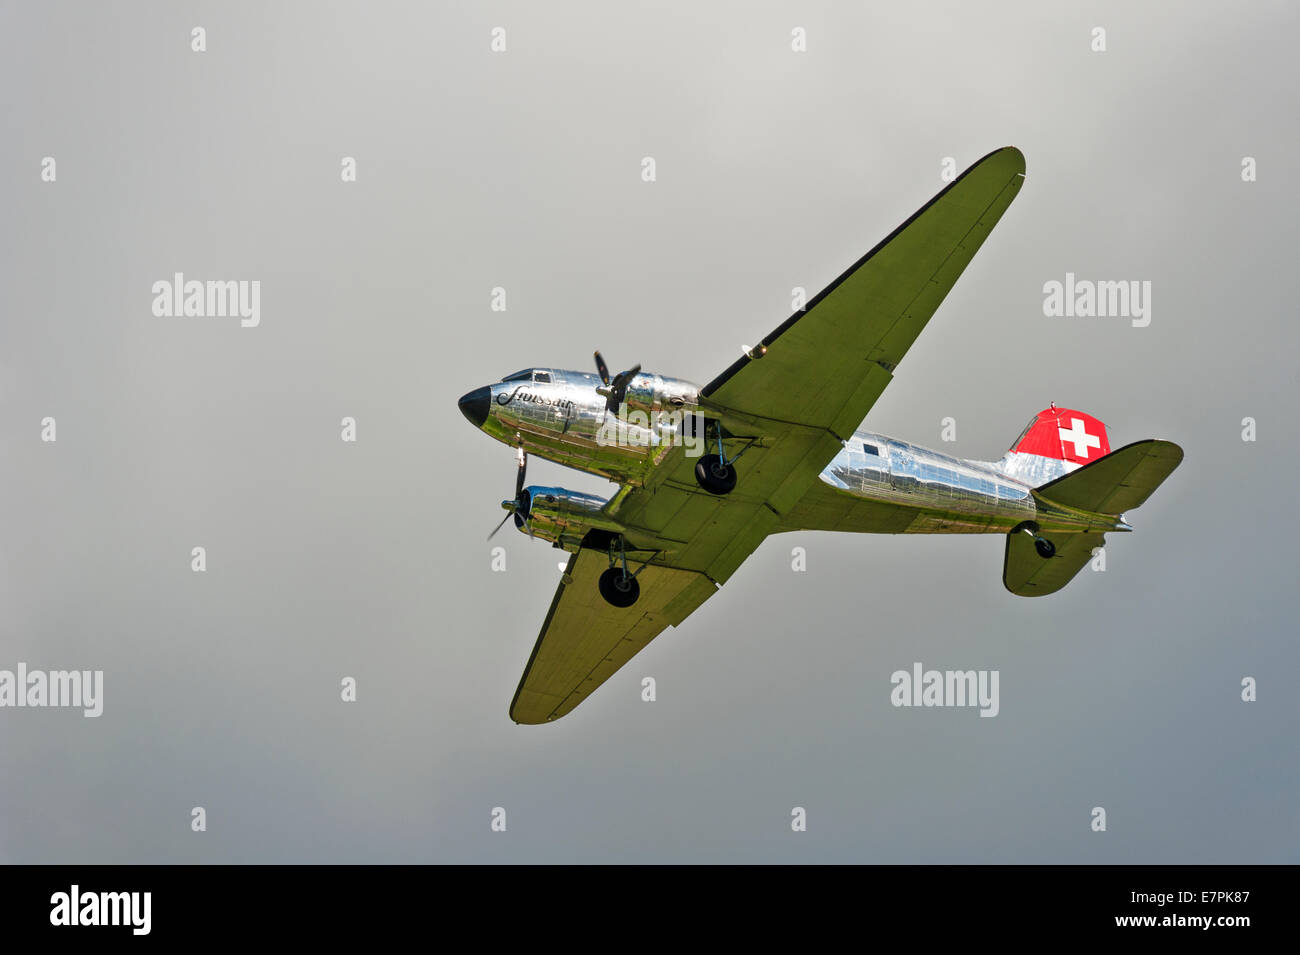 A Douglas DC-3 (Dakota) aircraft, of Swissair, coming in to land against a grey sky Stock Photo